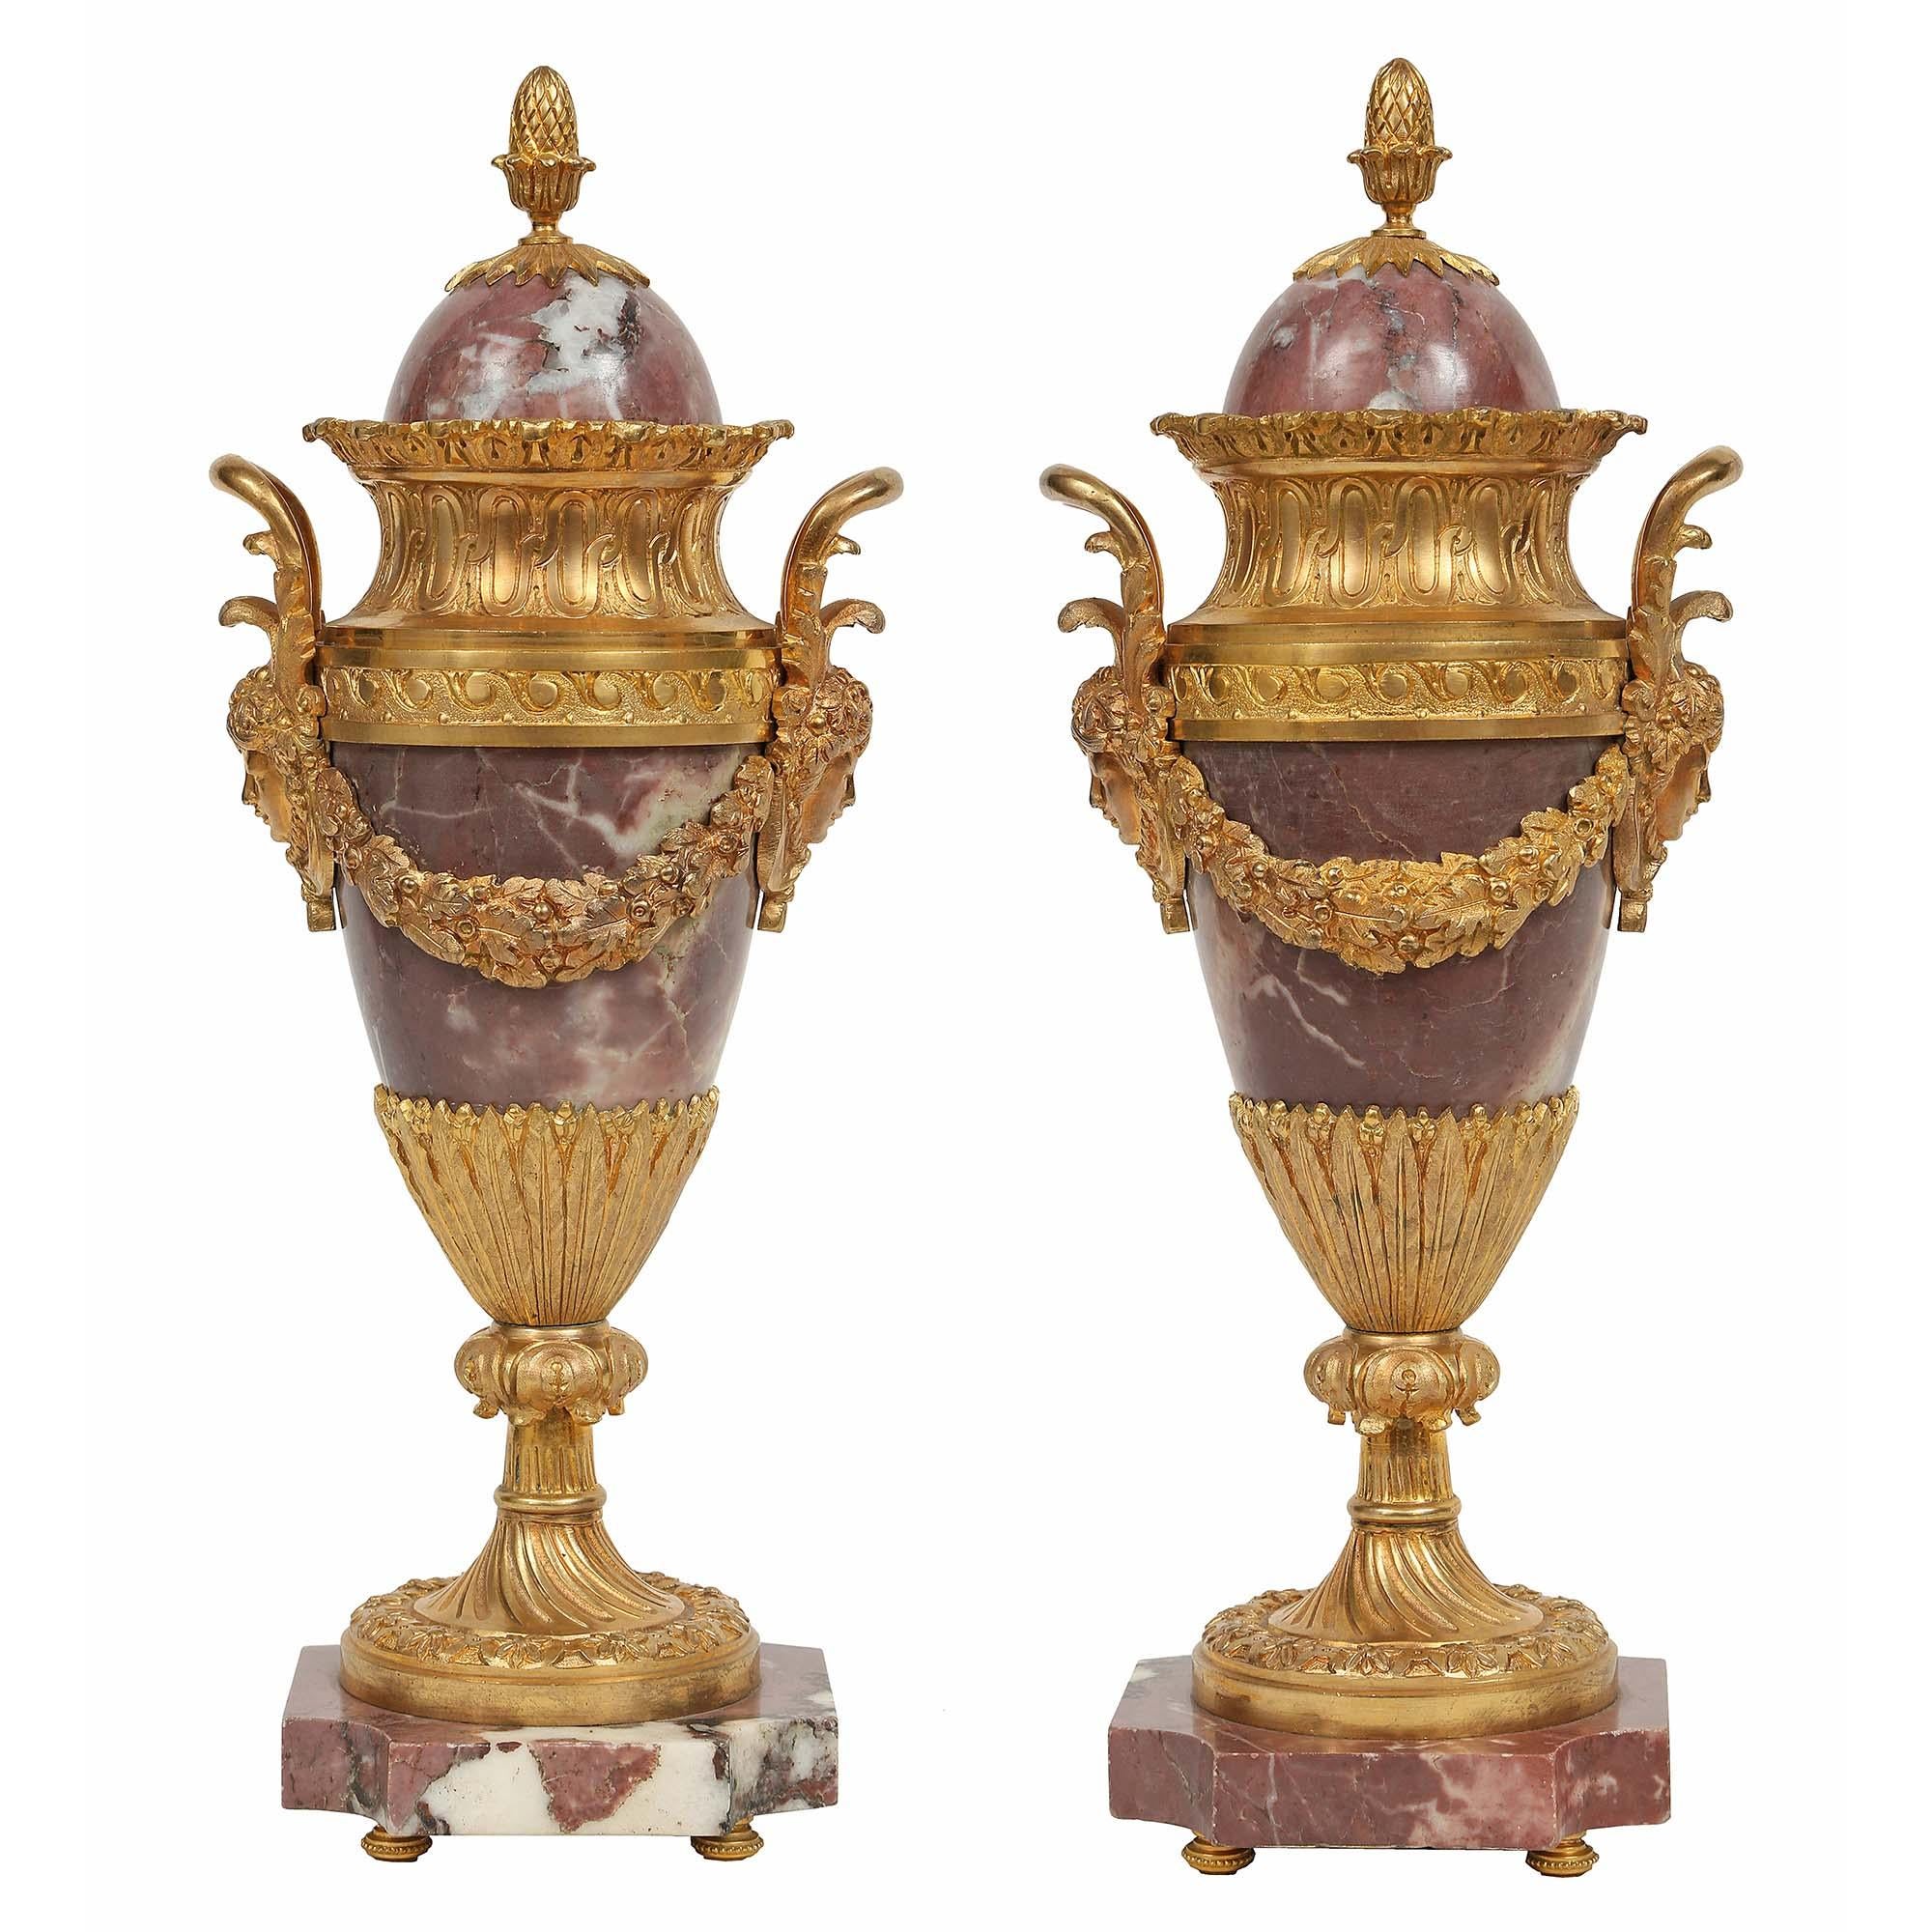 A very attractive pair of French mid 19th century Louis XVI st. Bréche Violette and ormolu cassolettes. The pair are raised by exquisite topie ormolu supports. Above is a stunning square shaped marble base with canted corners. The elongated ovoidal